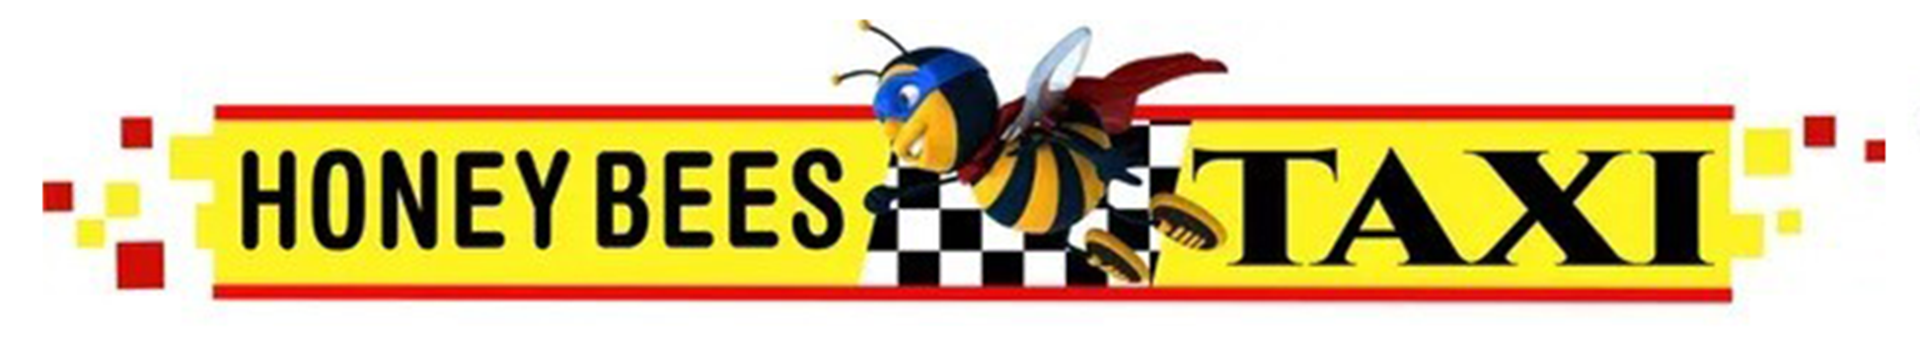 Honey Bees Taxi